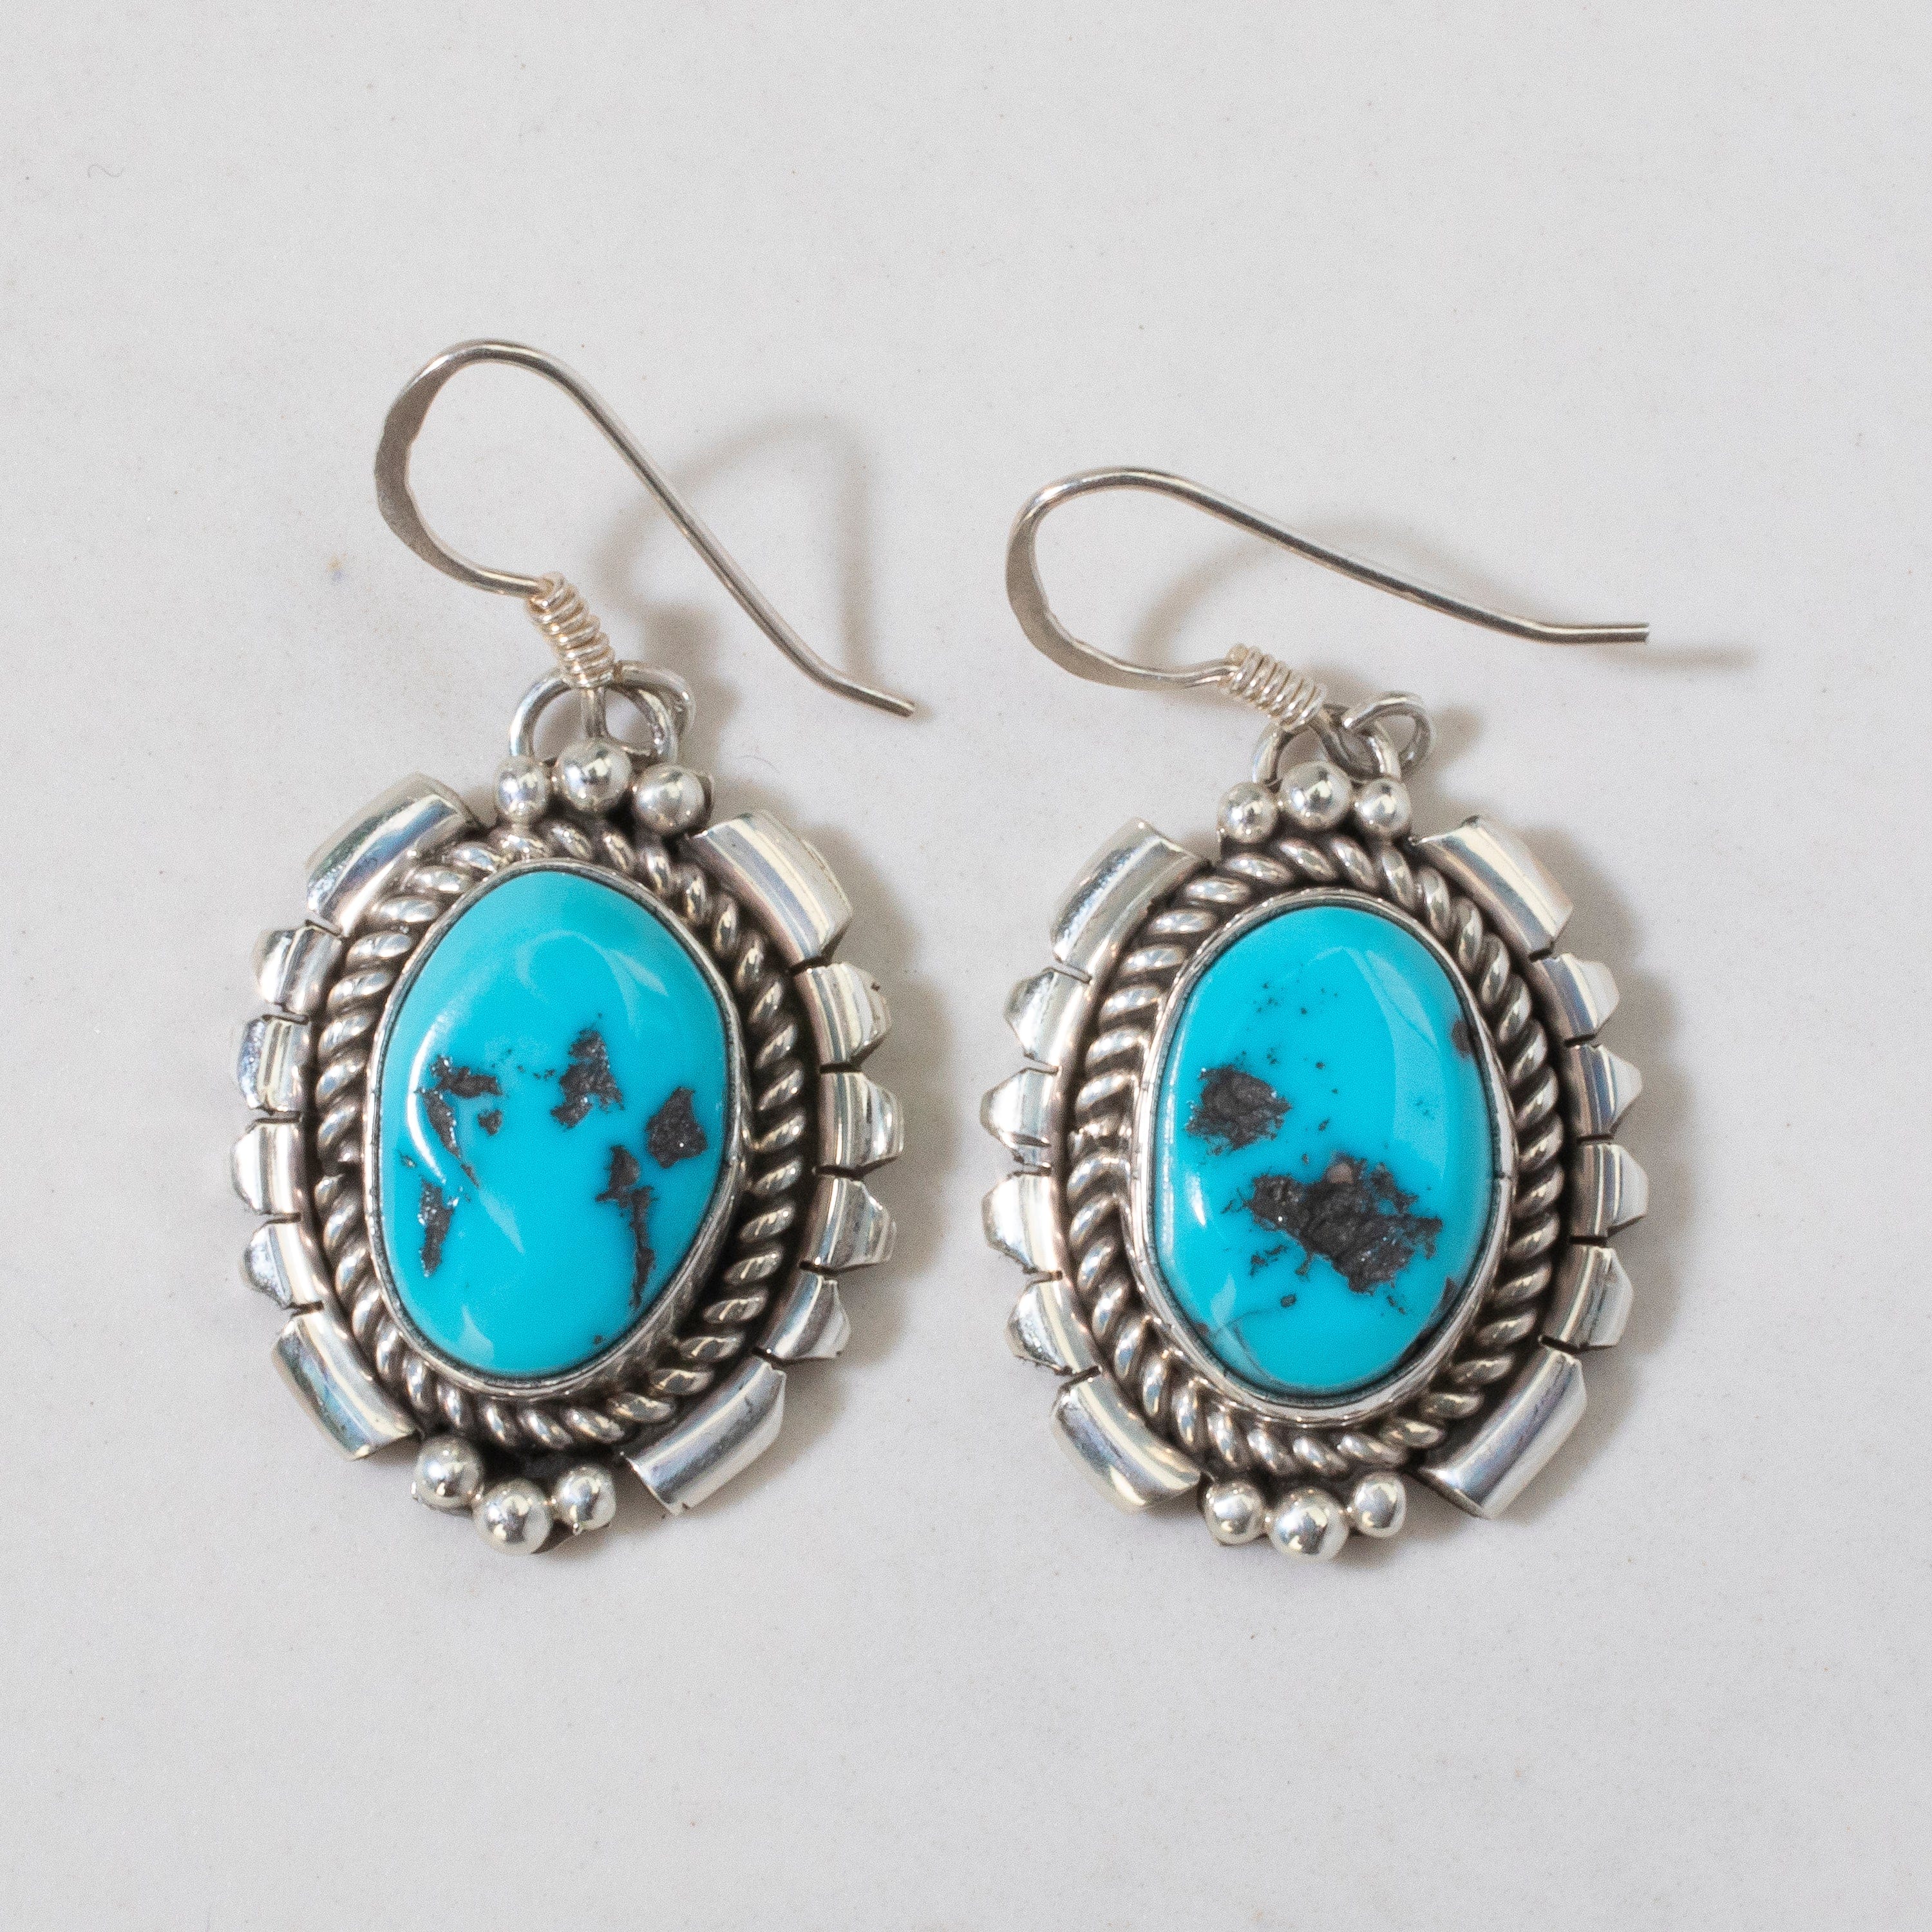 Kalifano Native American Jewelry Sleeping Beauty Turquoise Oval Dangle Navajo USA Native American Made 925 Sterling Silver Earrings with French Hook NAE600.019